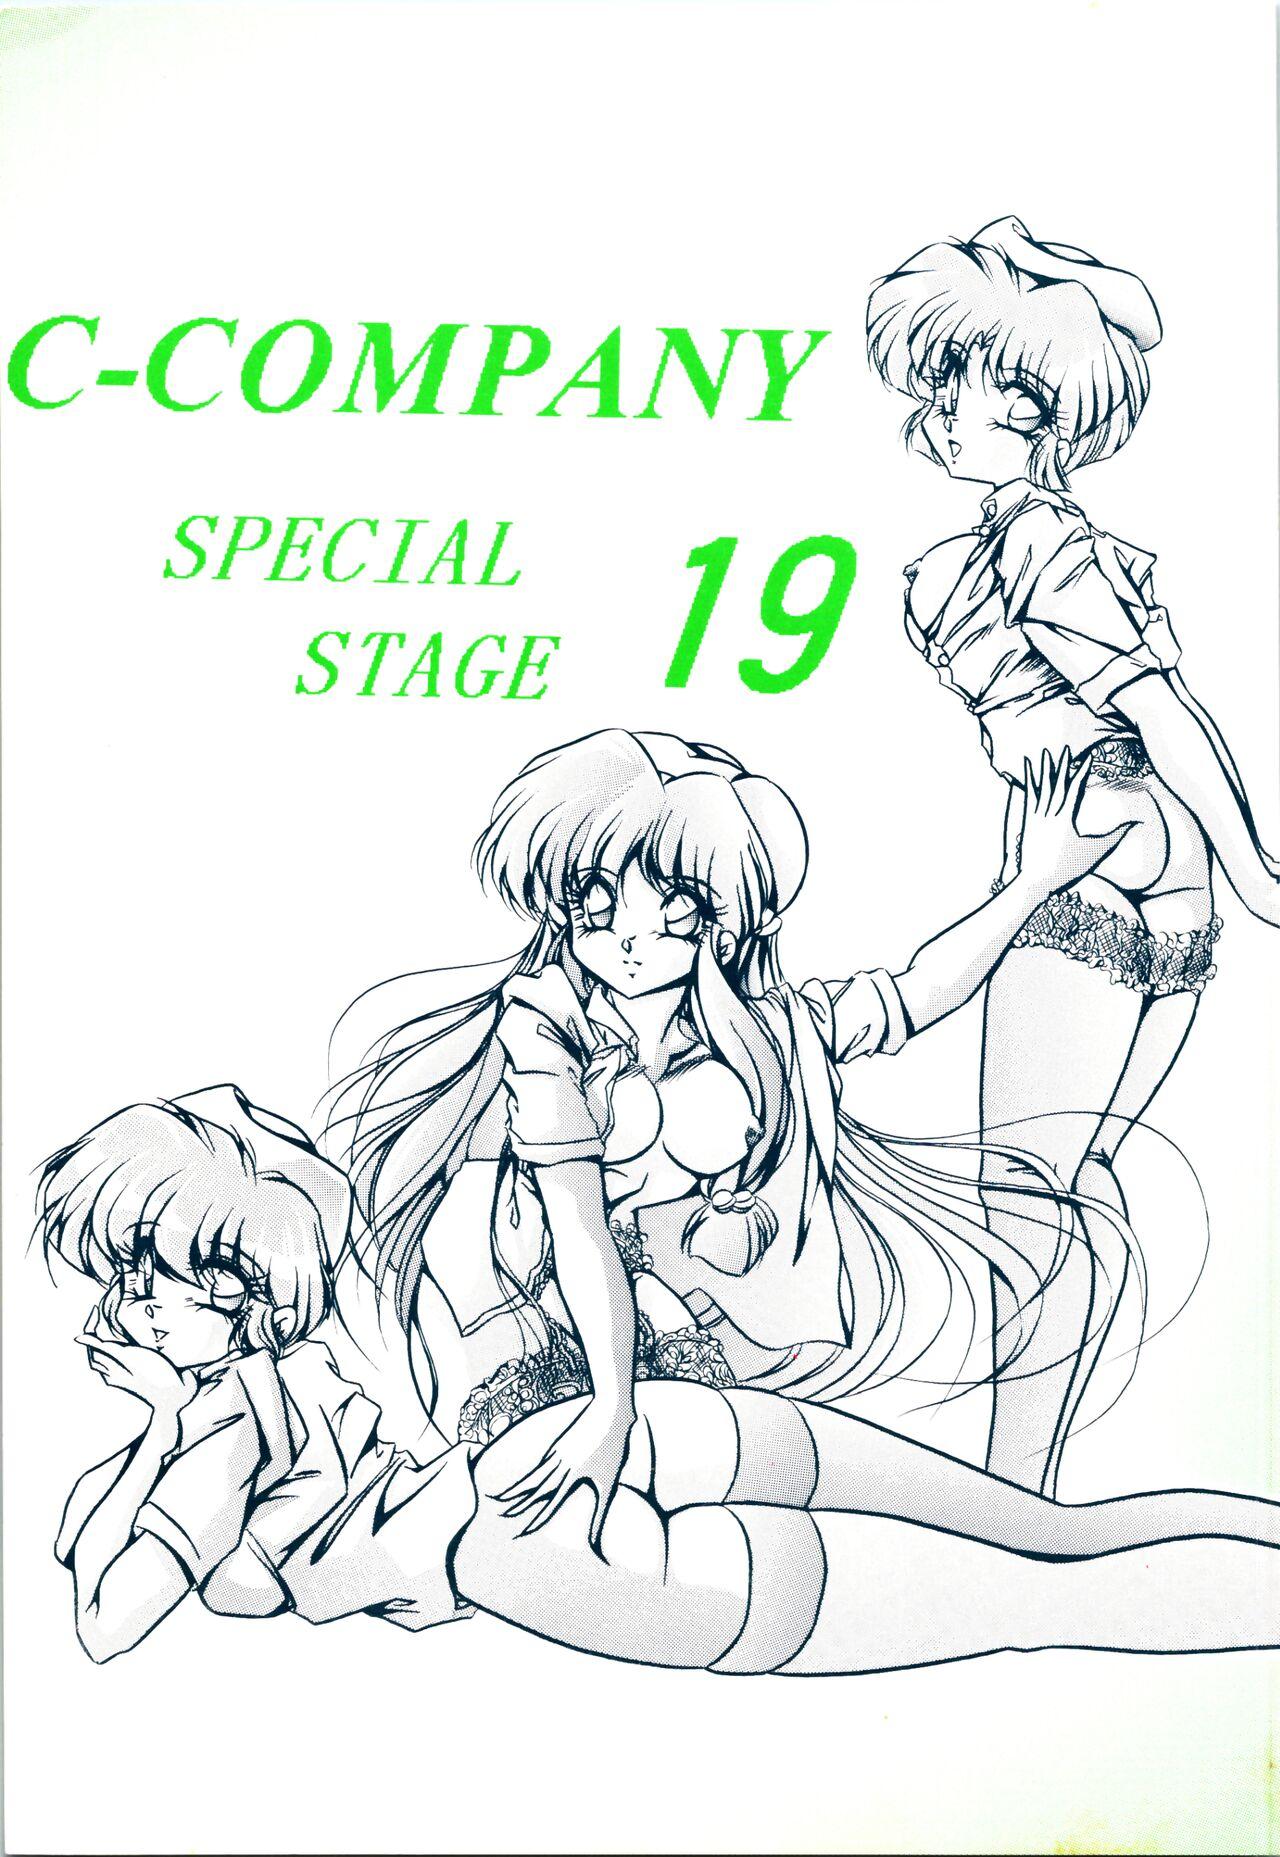 Moms C-COMPANY SPECIAL STAGE 19 - Ranma 12 Boys - Page 1